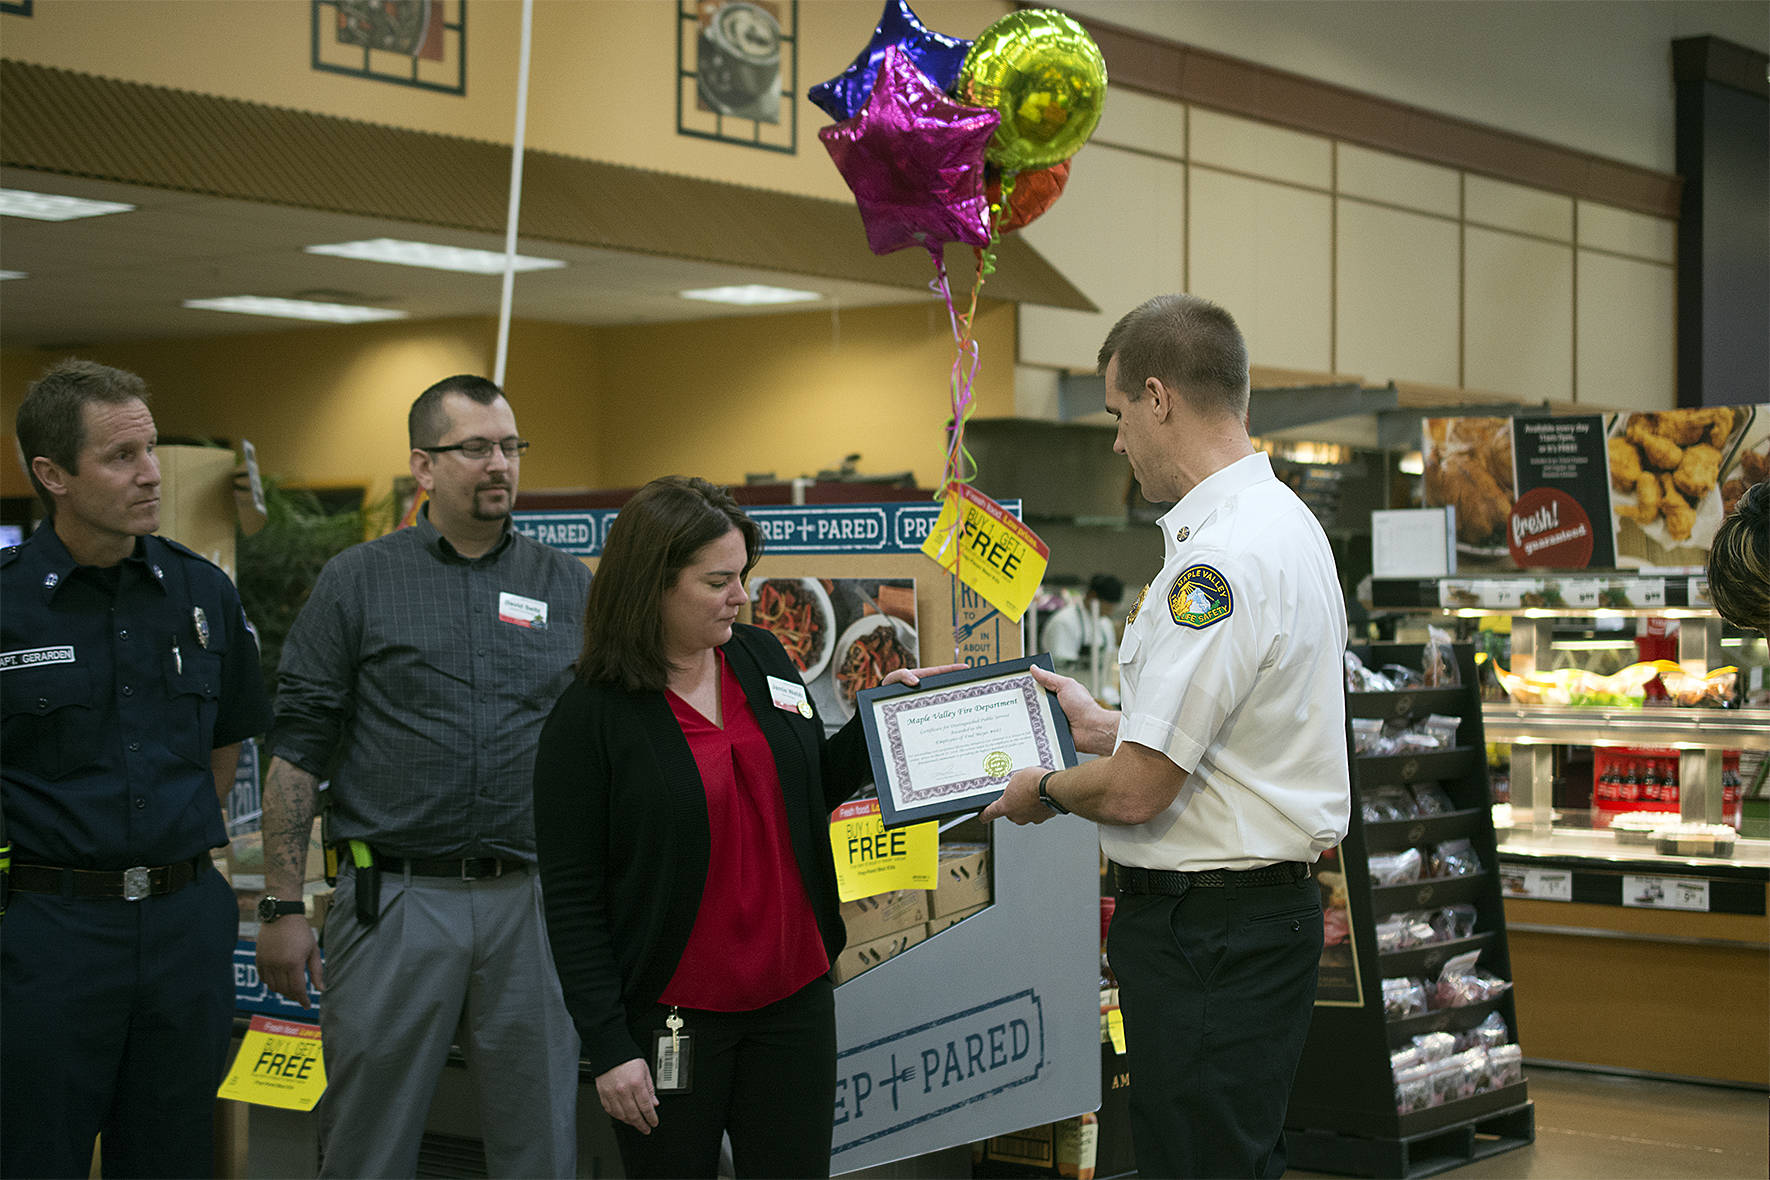 Fire Chief Aaron Tyerman hands the Maple Valley Fred Meyer store manager a framed certificate to thank the Fred Meyer employees for their assistance during an incident at their store. Photo by Kayse Angel